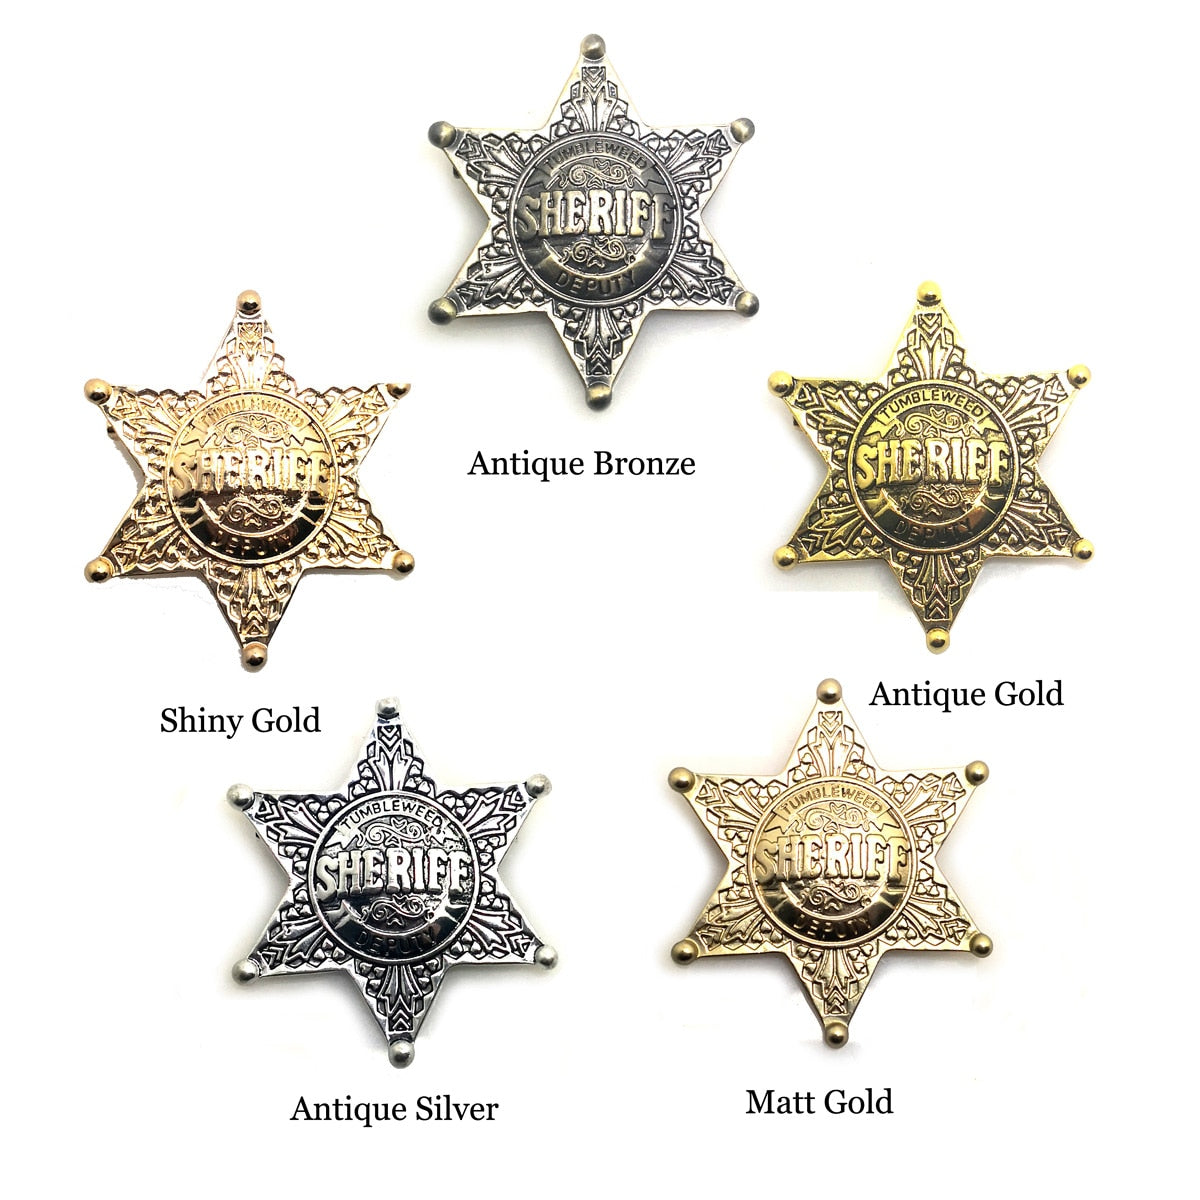 Cartoon SHERIFF DEPUTY Prizes Pin Brooches Vintage Hexagonal Star Honor Badges Ornament Jewelry for Cowboy Adults Kids 48mm